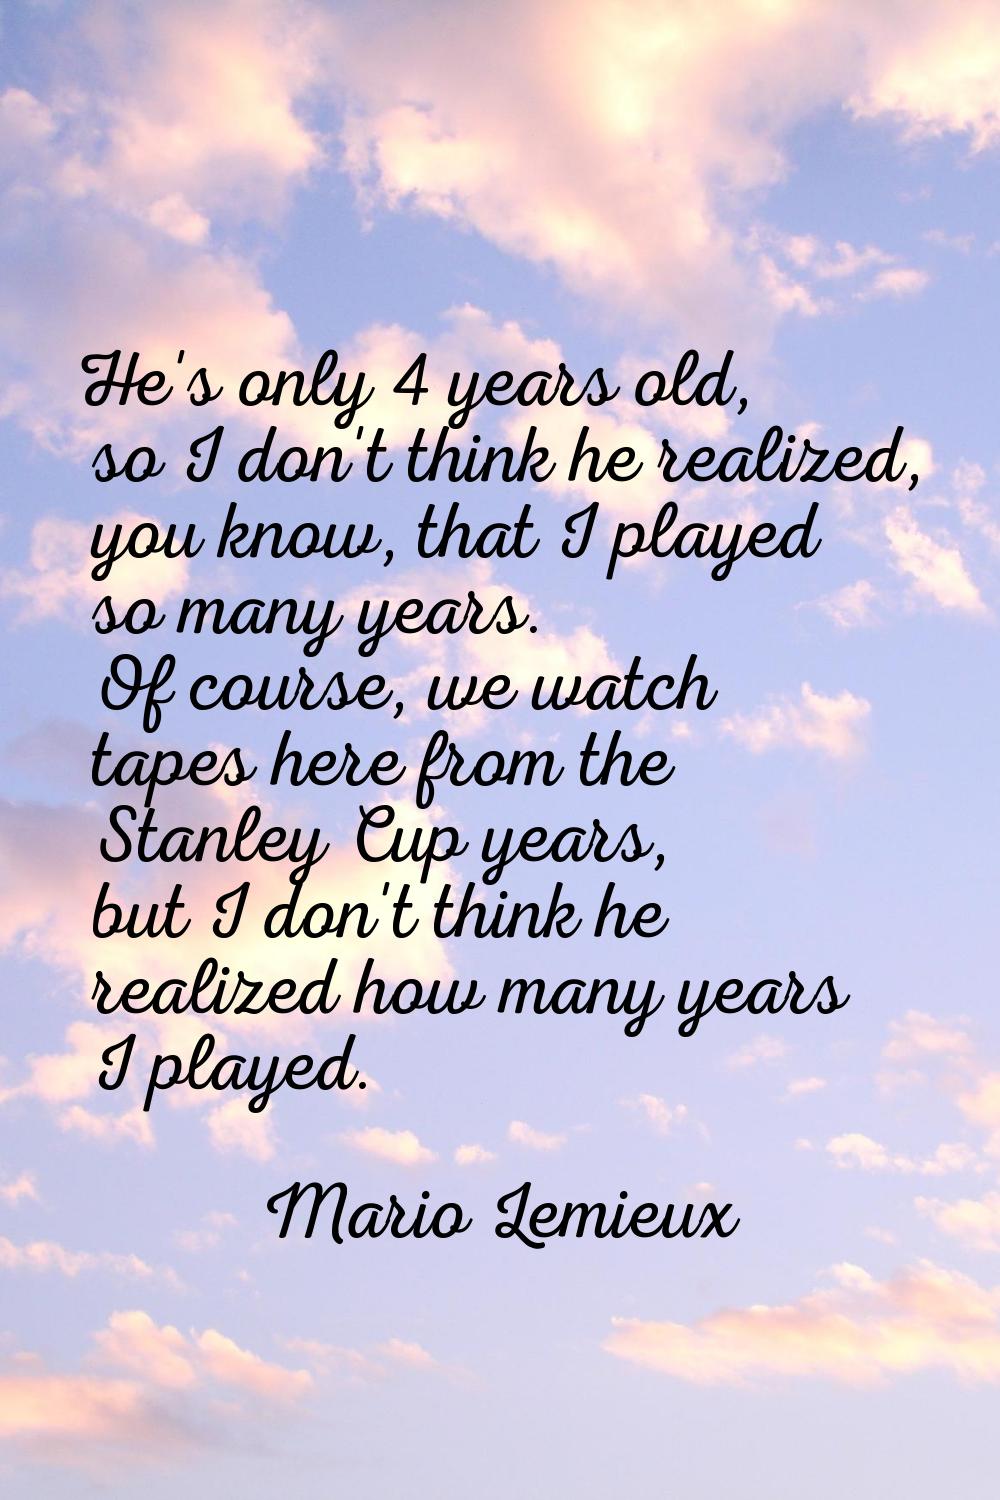 He's only 4 years old, so I don't think he realized, you know, that I played so many years. Of cour